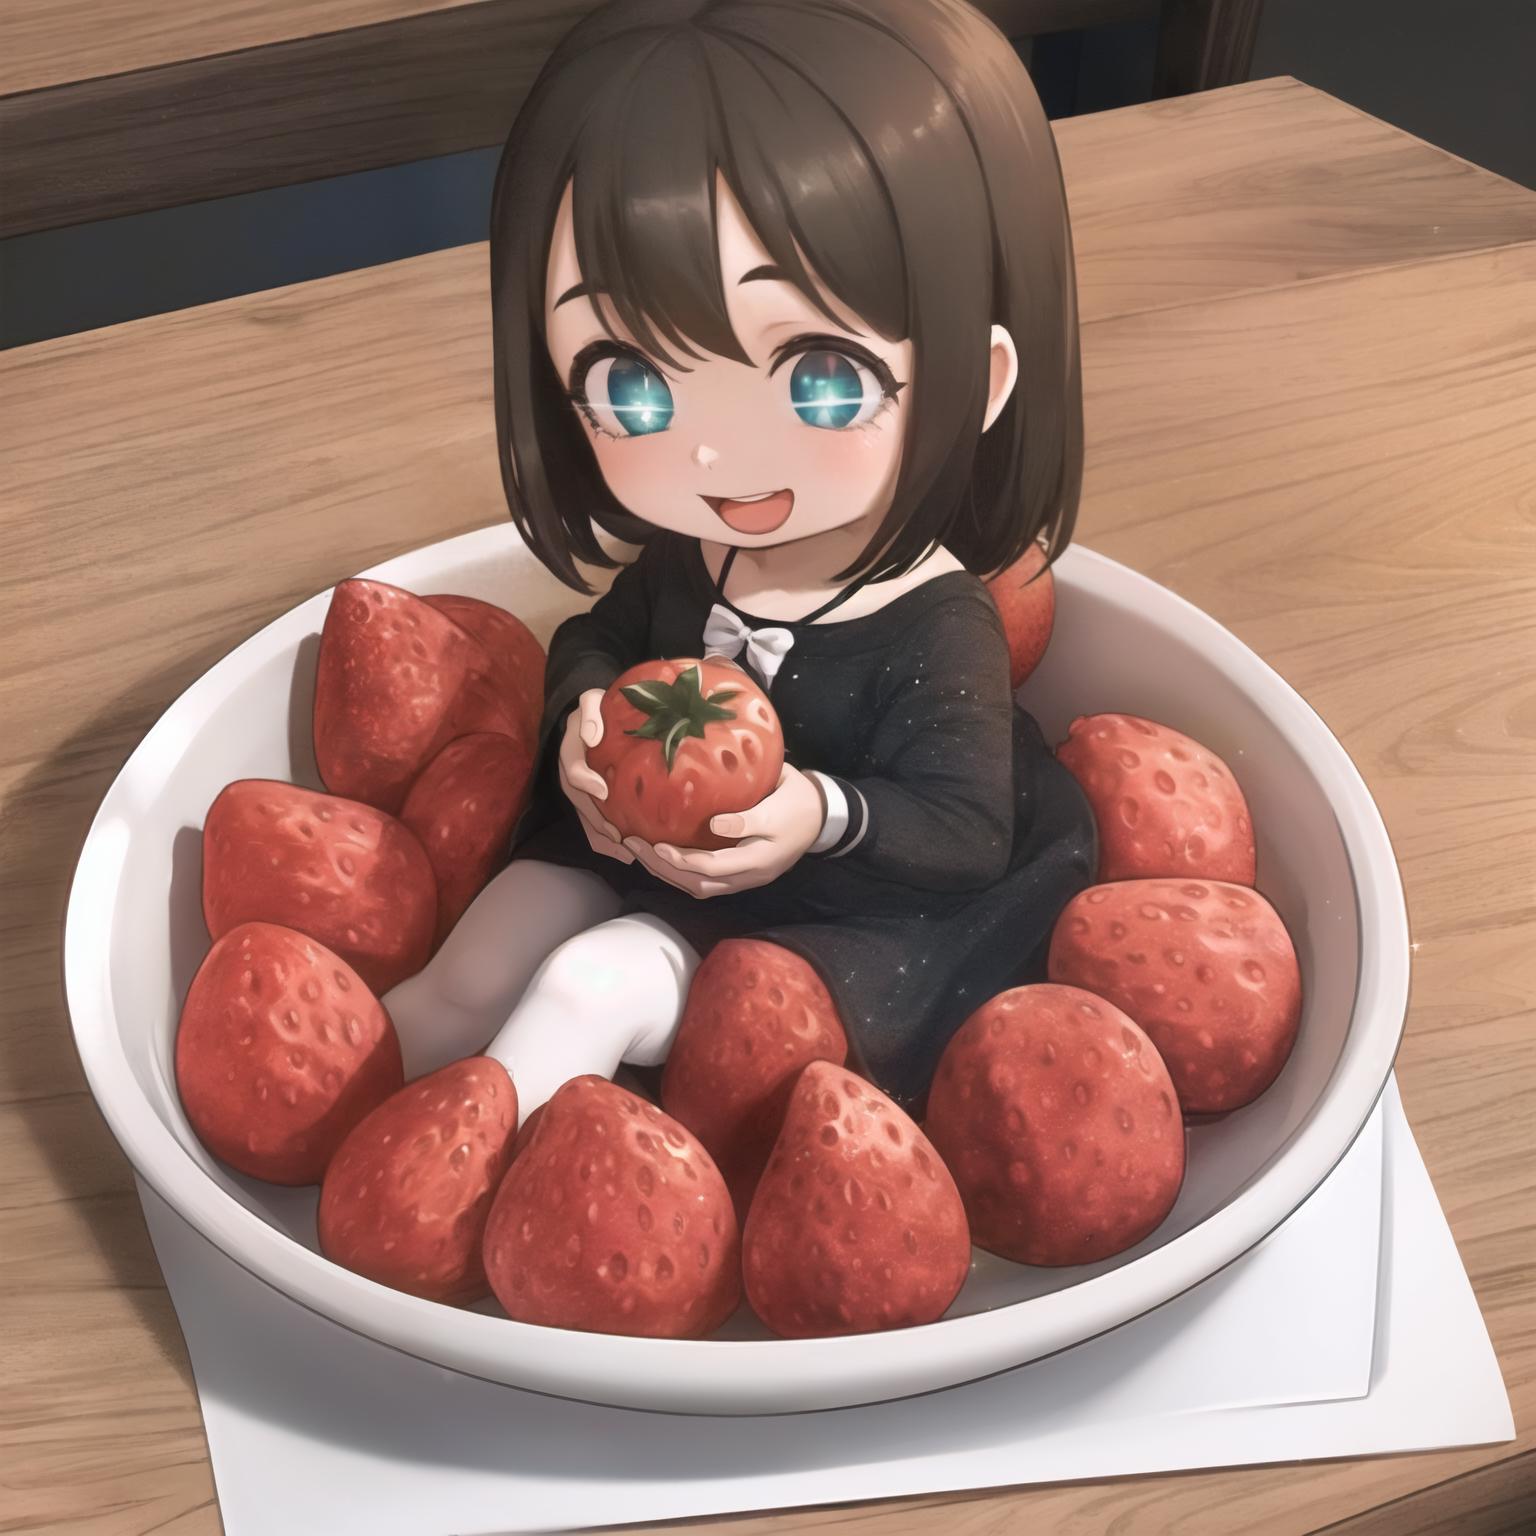 A little girl sitting in a bowl of strawberries.